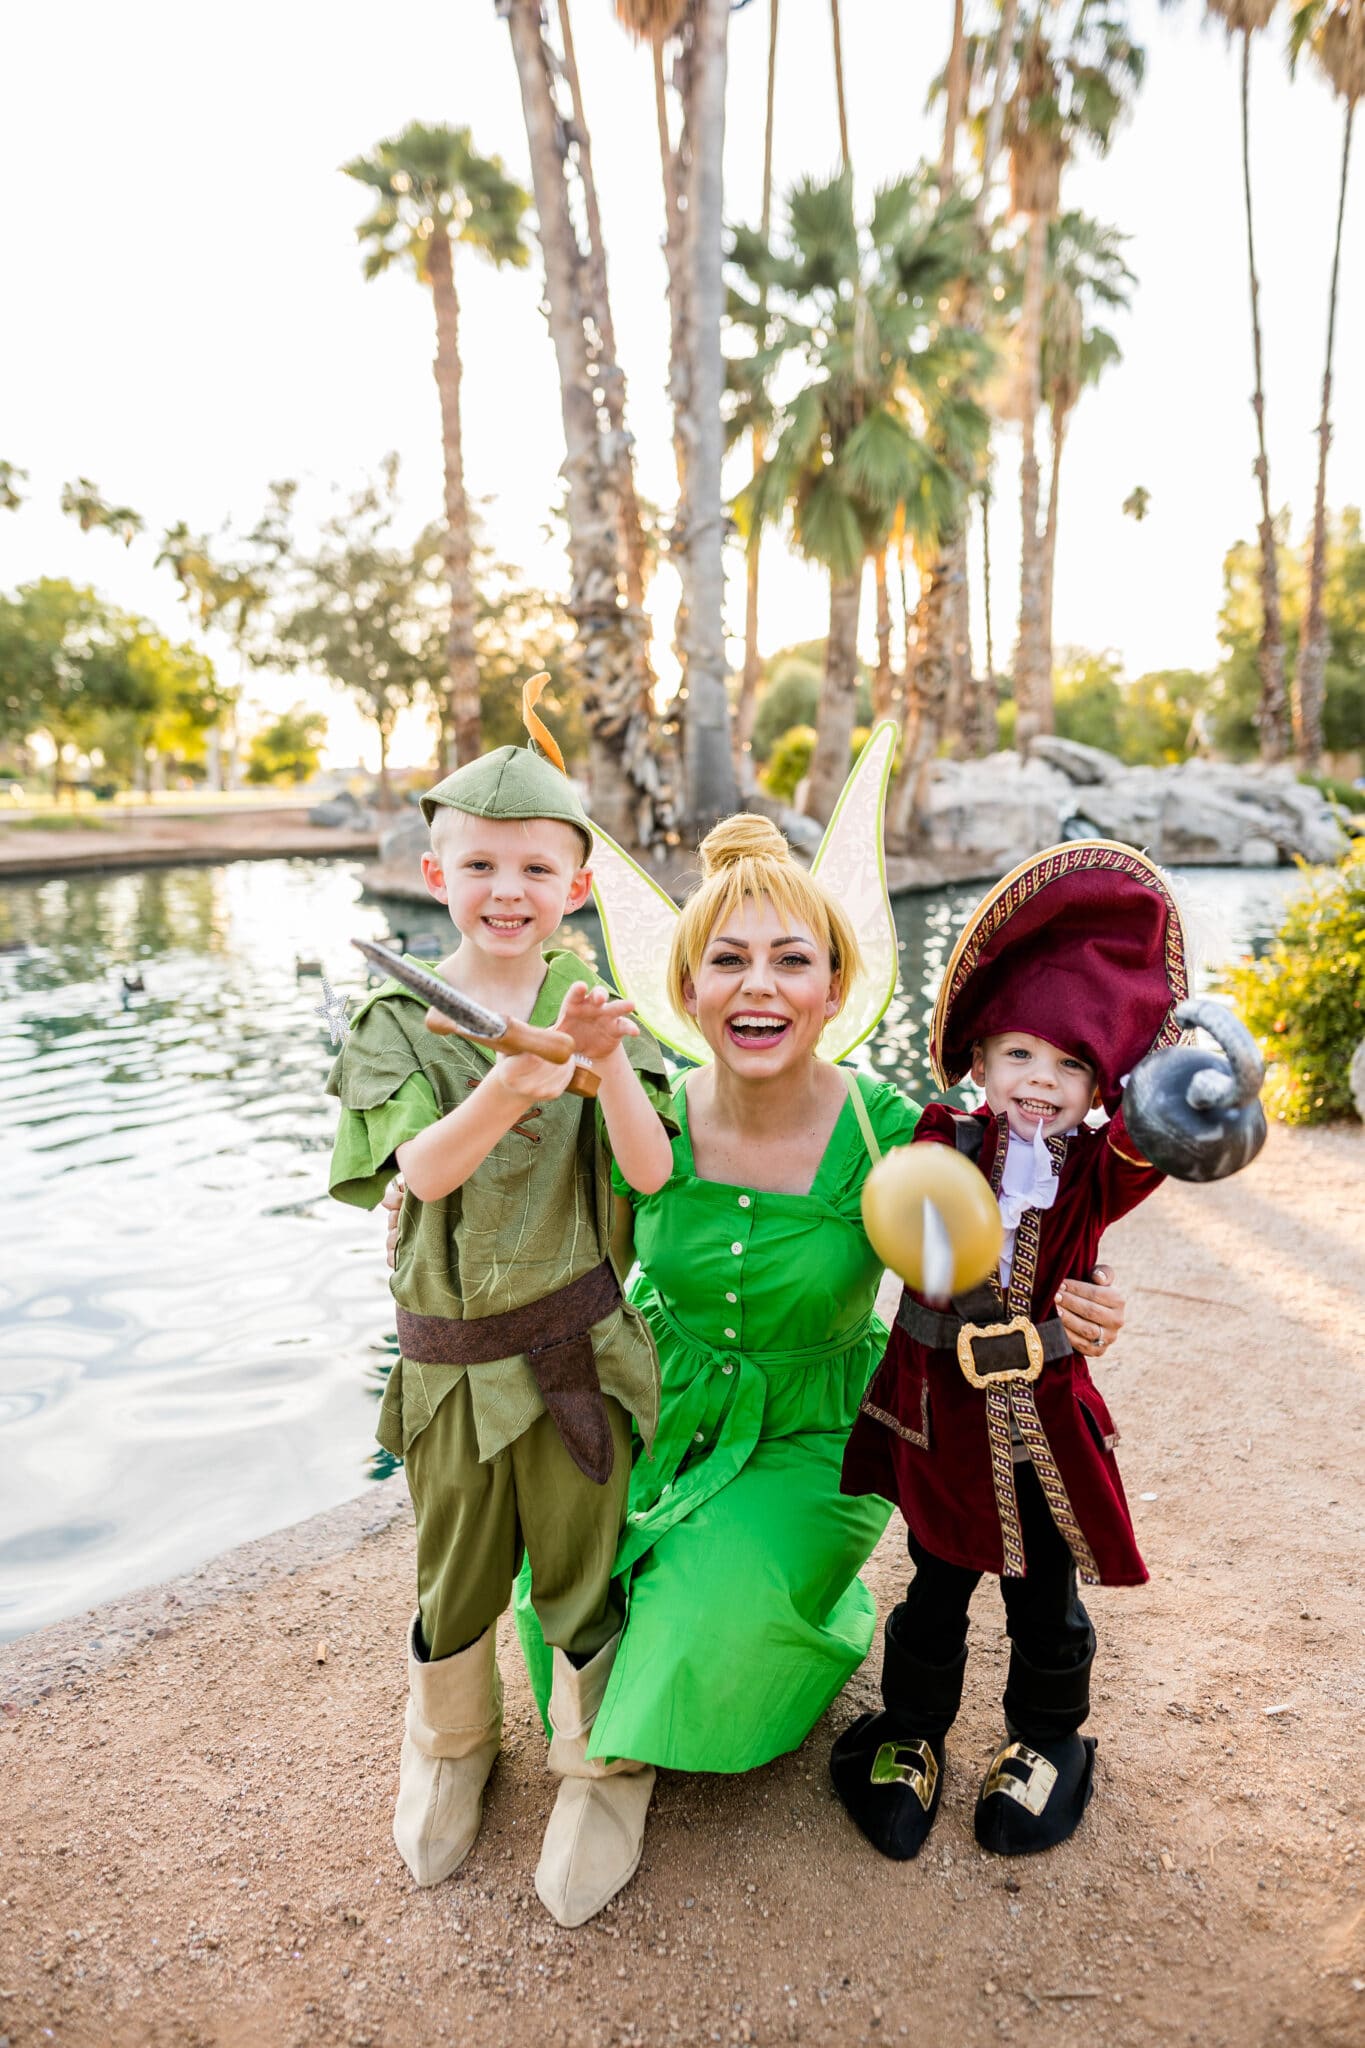 A mom dressed as Tinkerbell with her two boys dressed as Peter Pan and Captain Hook characters in Peter Pan family costumes. 